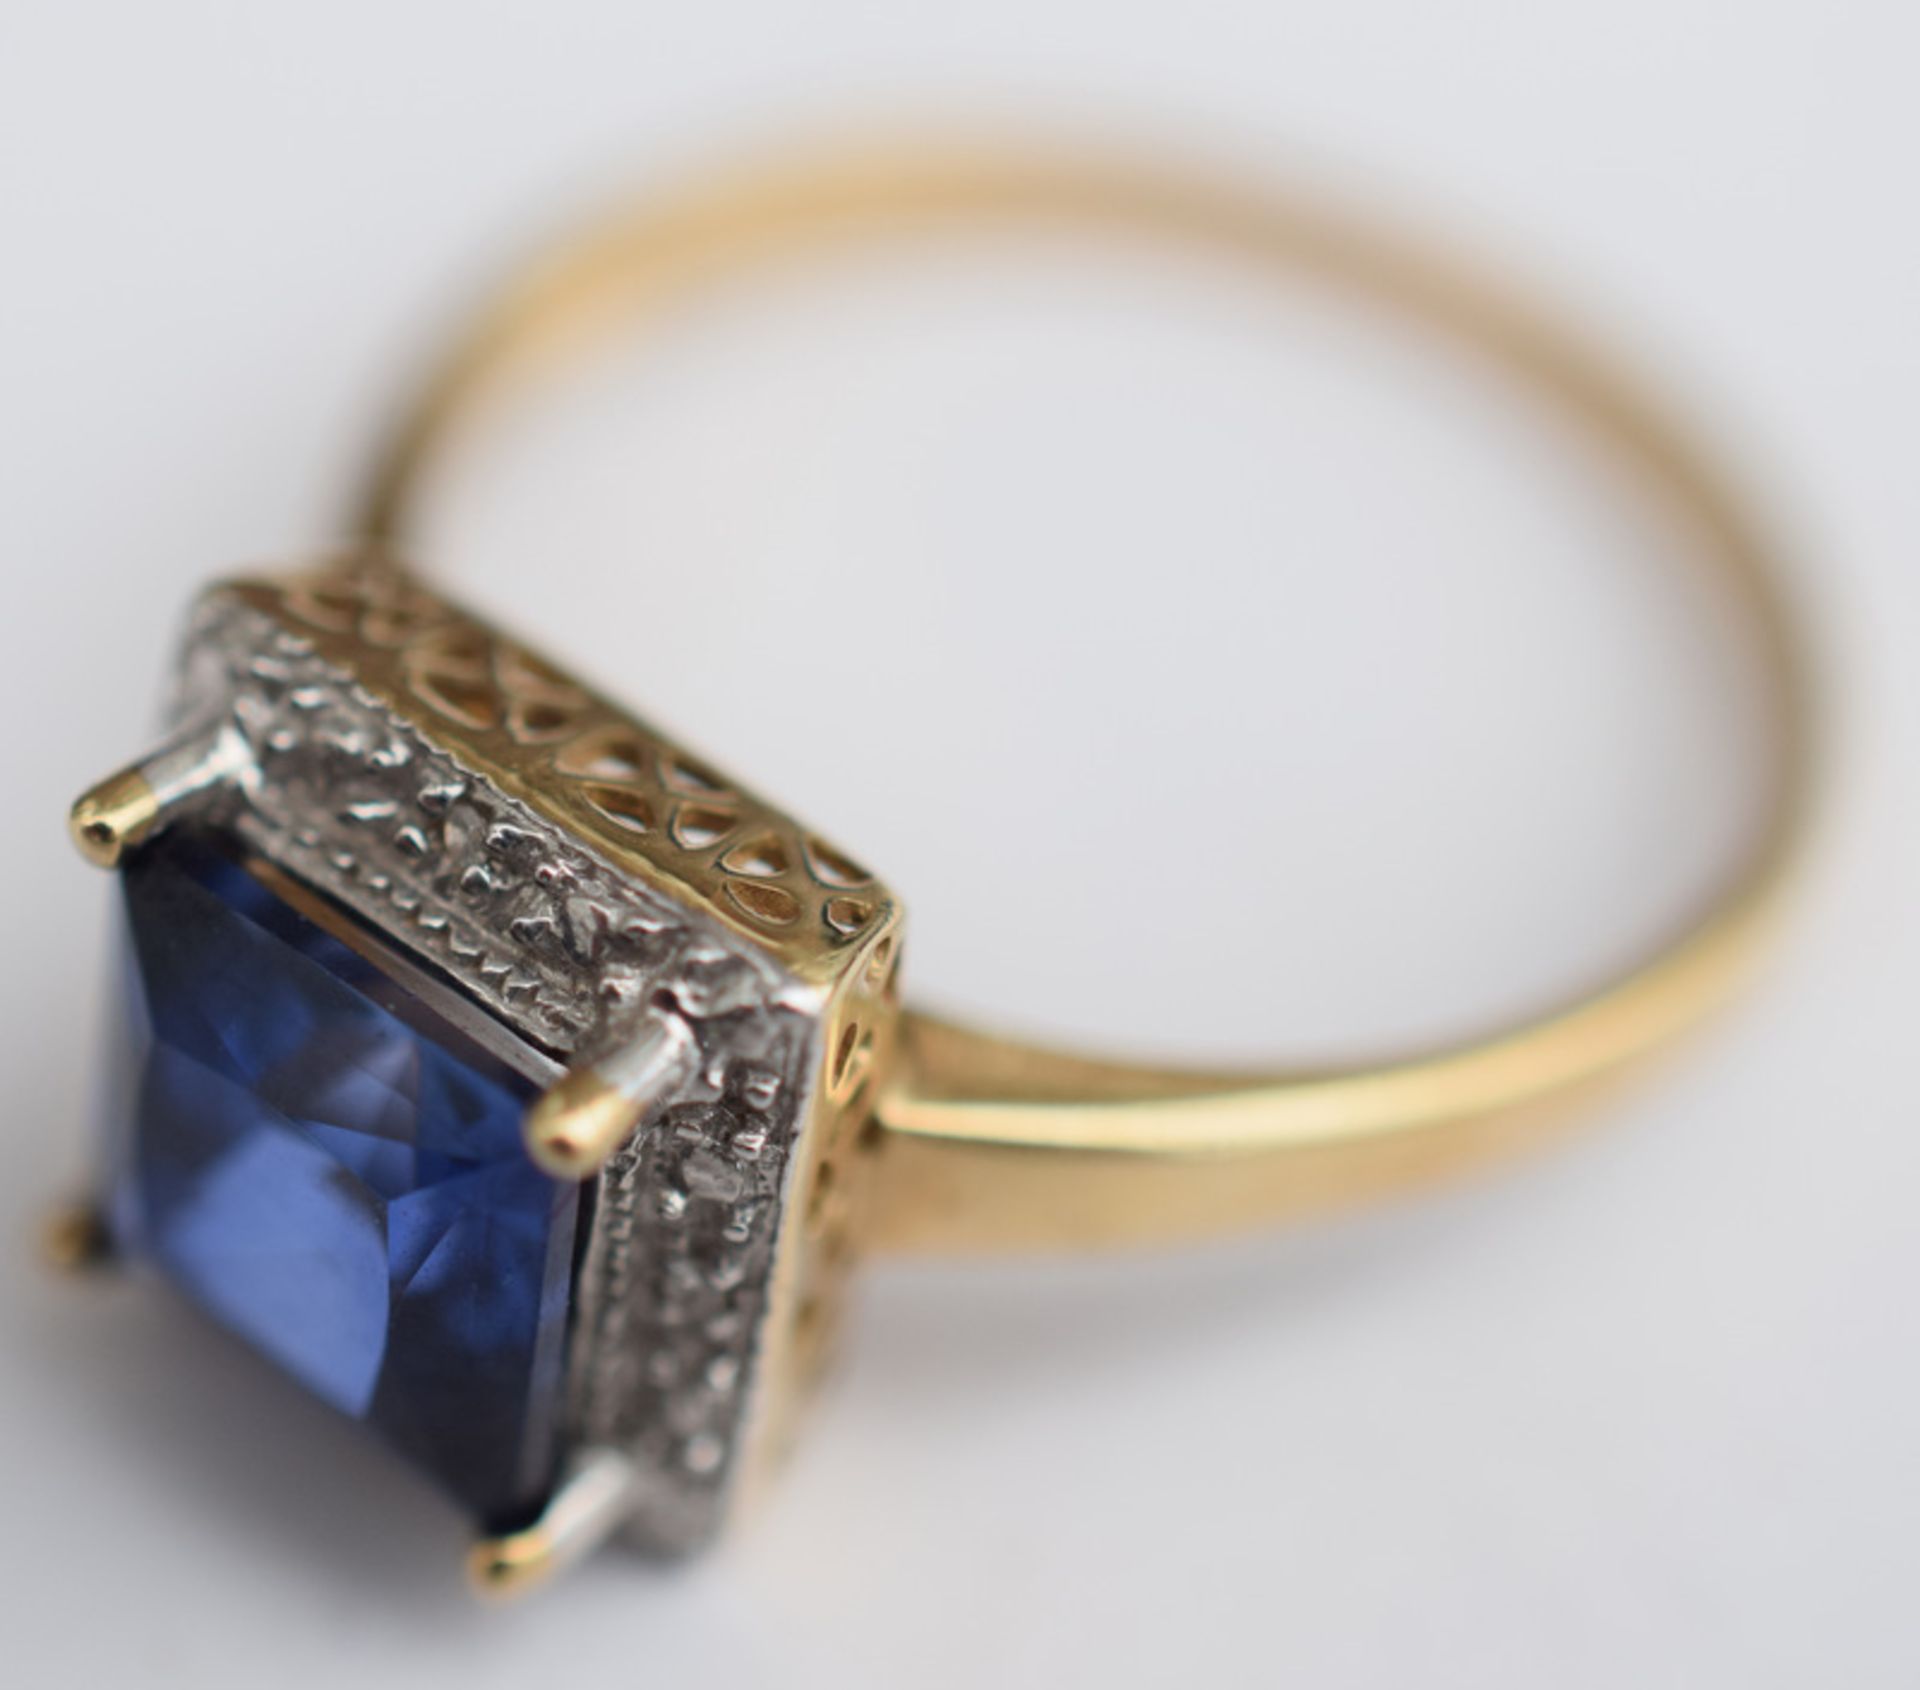 Ladies 9ct Gold Ring With Large Blue Stone And Diamonds - Image 3 of 4